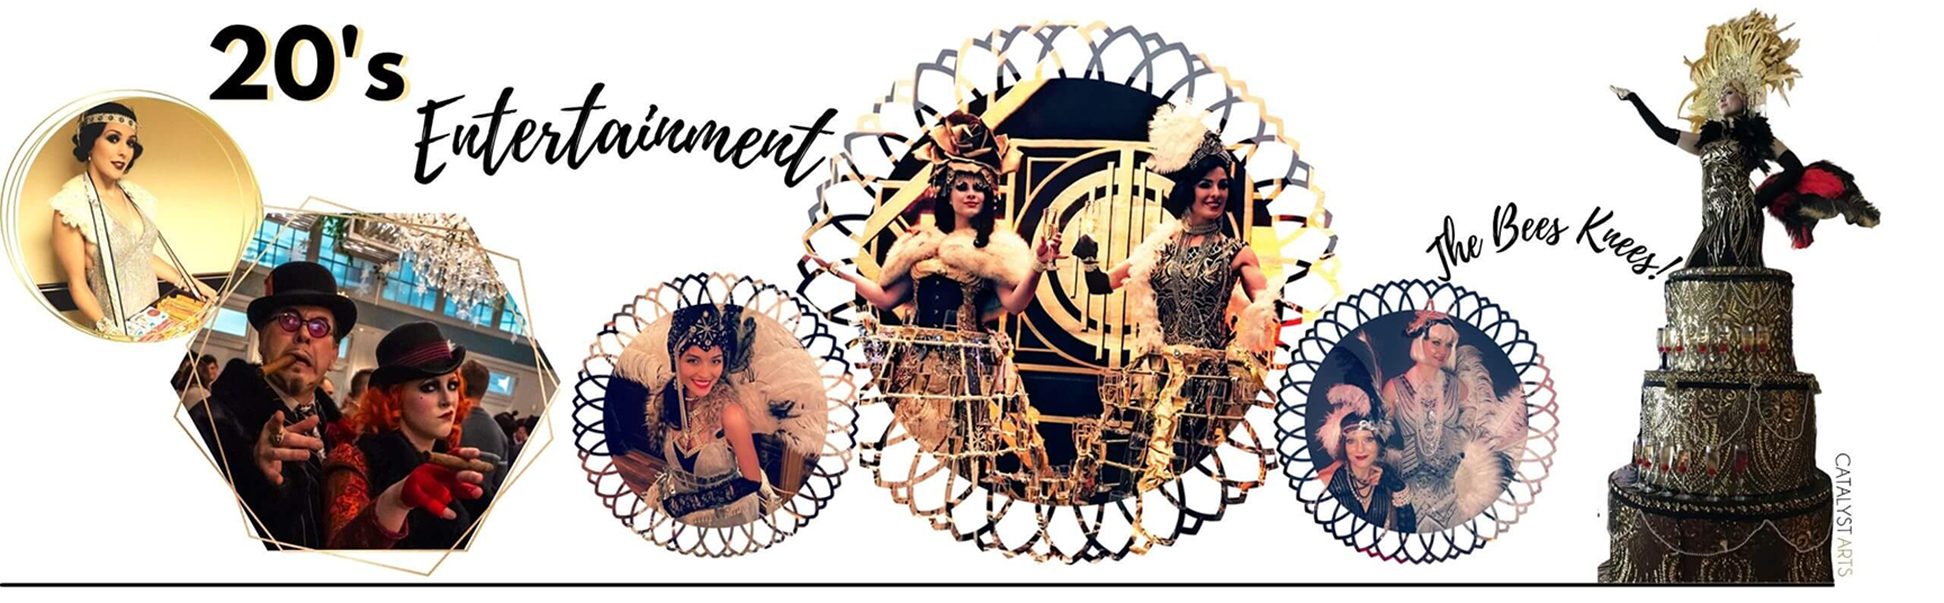 20's Gatsby Entertainment by Catalyst Arts in California